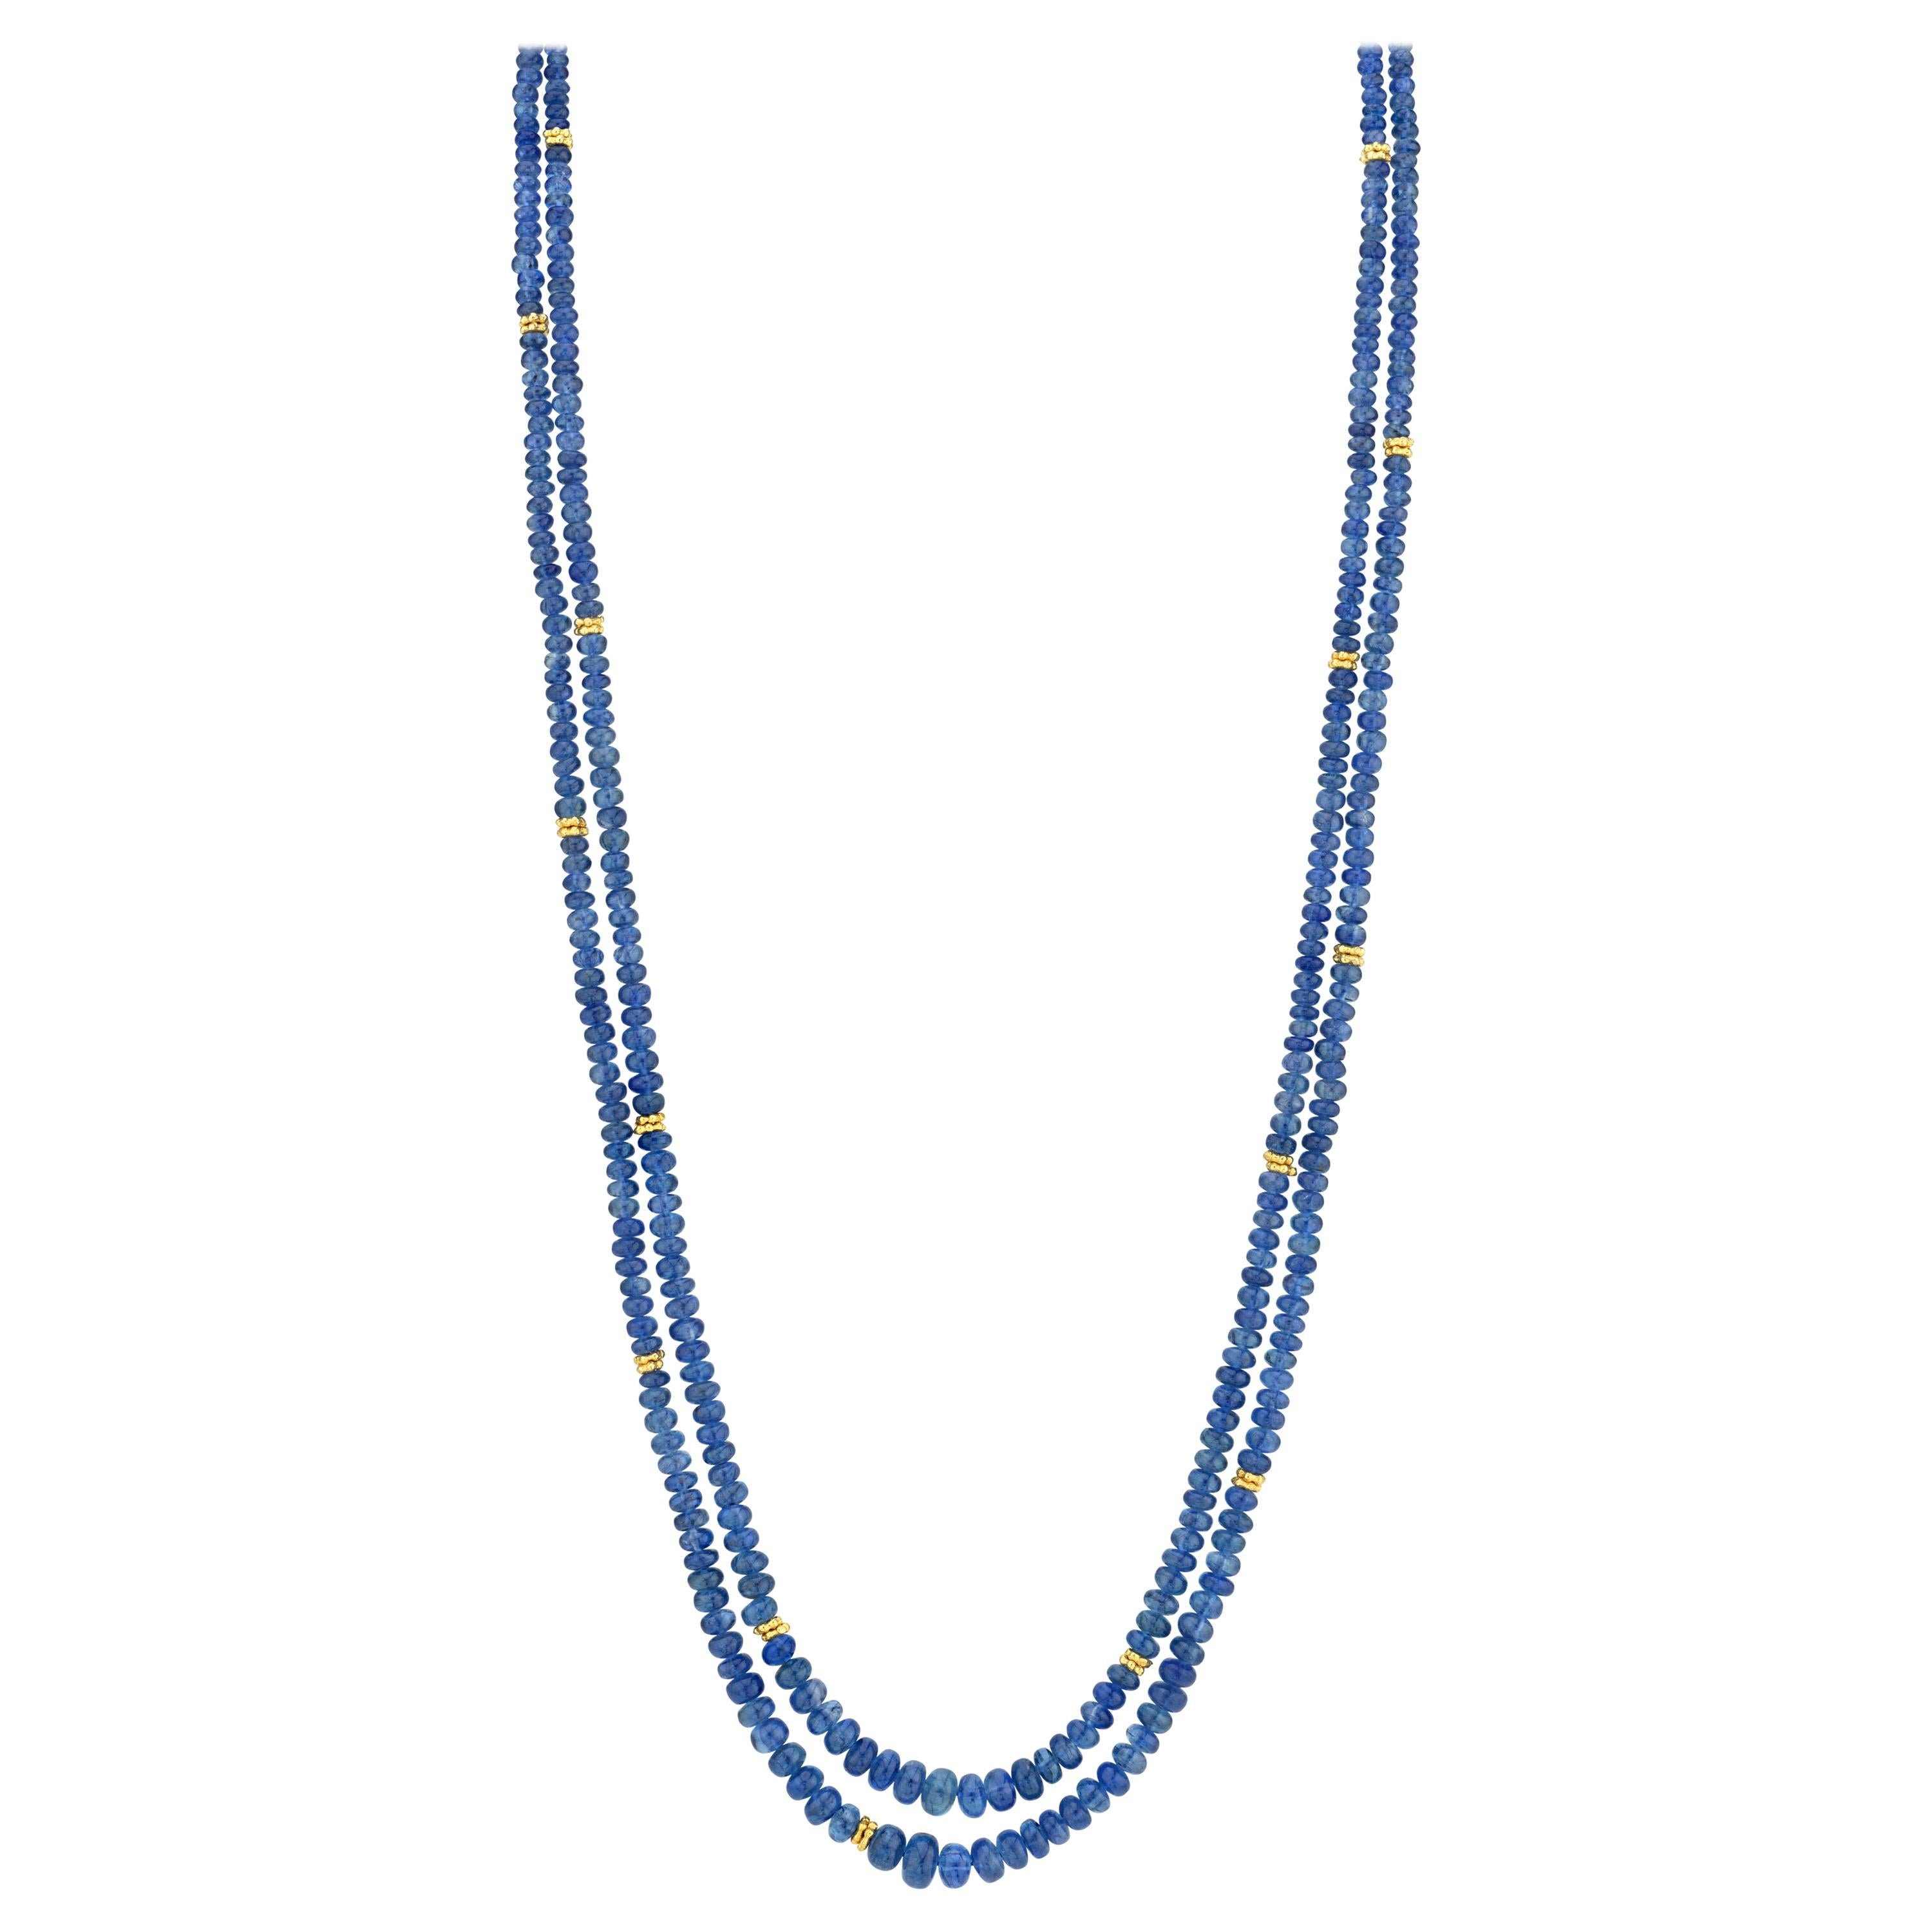 Blue Sapphire Bead, Double Strand Necklace, Yellow Gold Spacers and Clasp